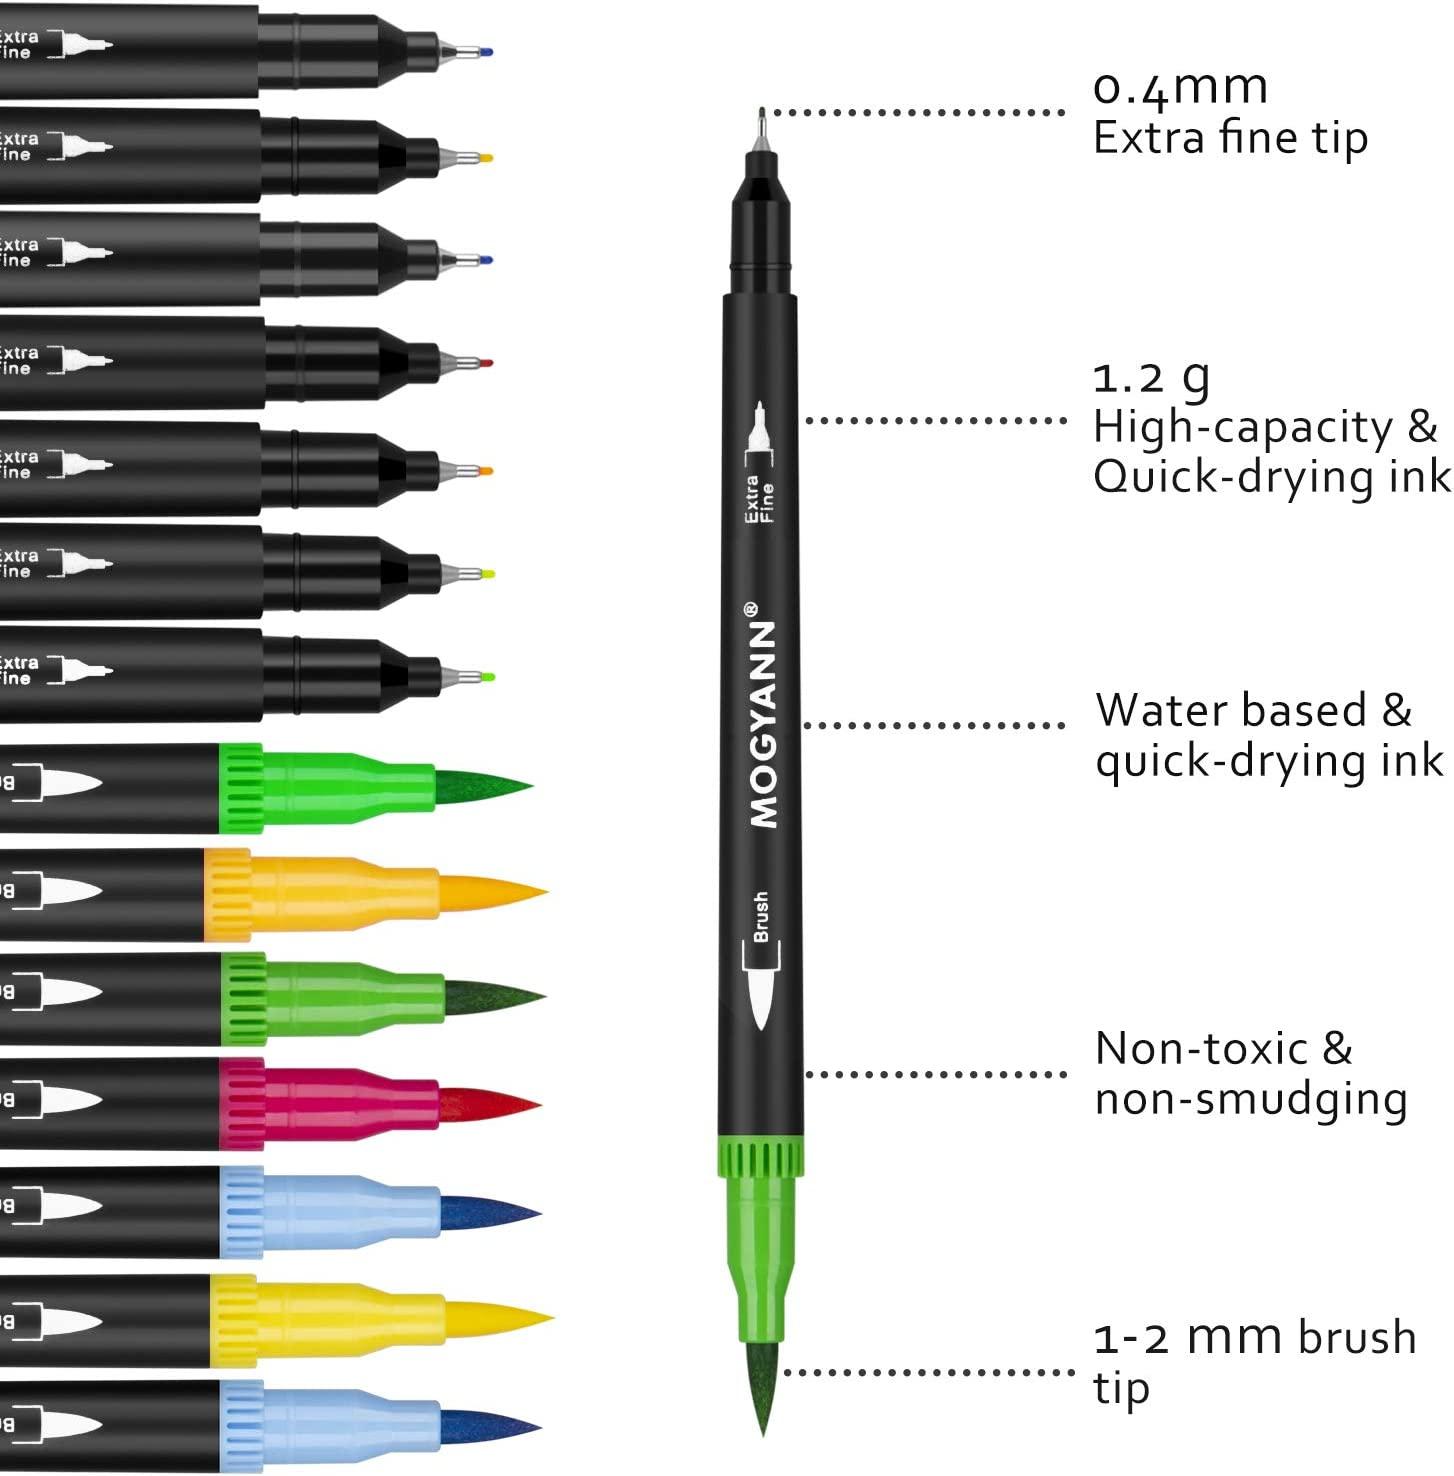 Mogyann Markers for Adult Coloring 72 Coloring Pens Dual Tip Brush